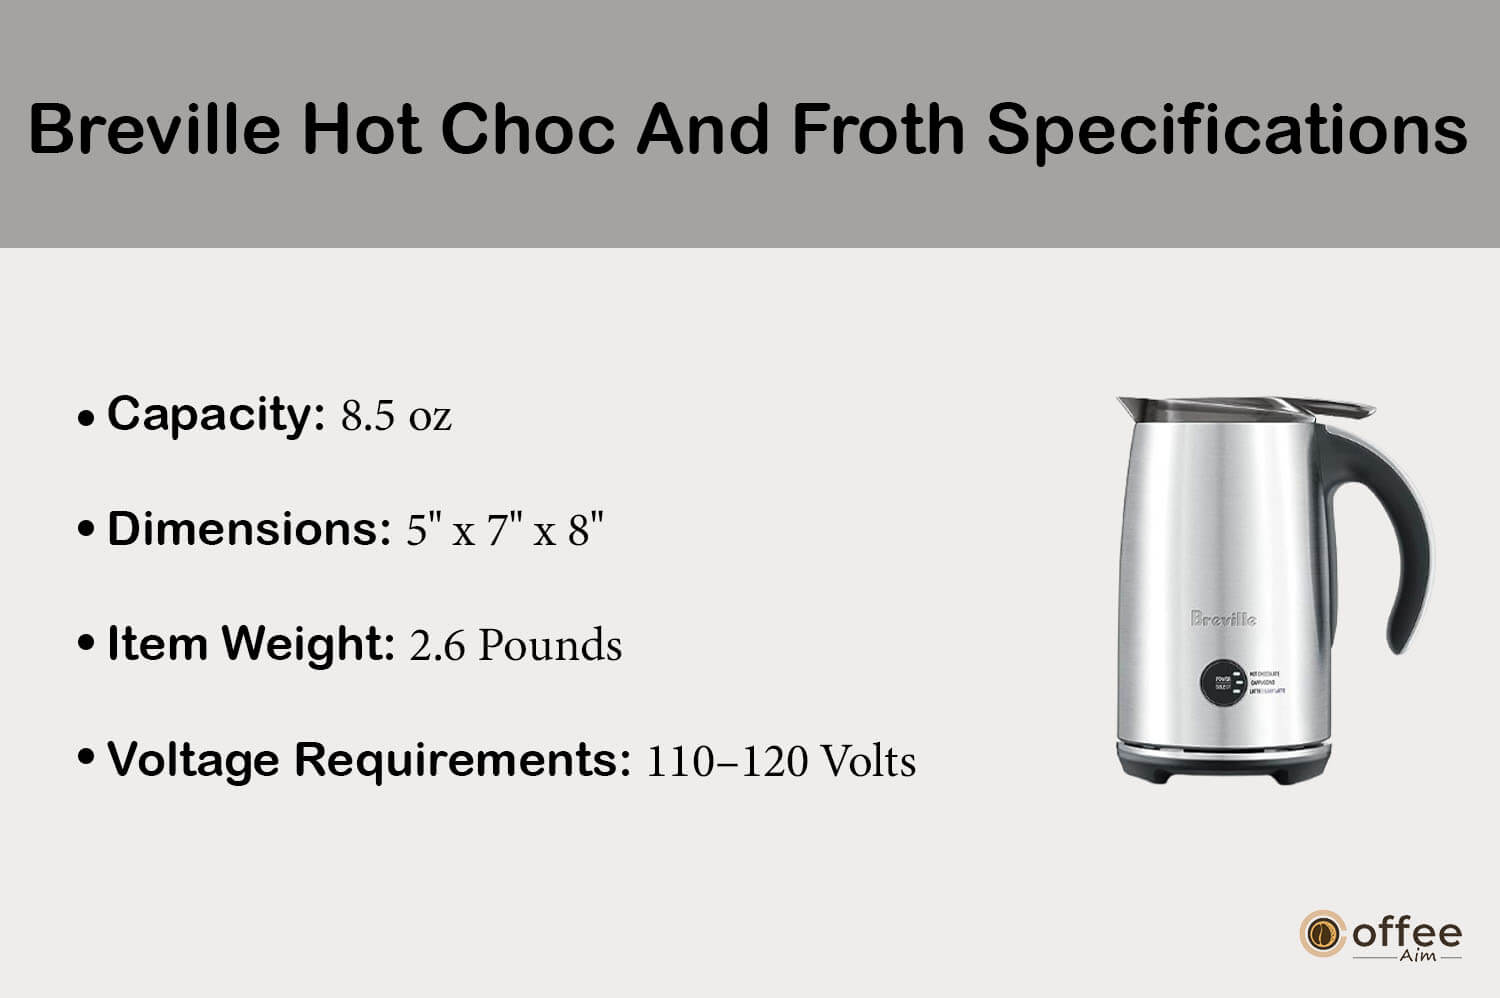 The image details the specifications of the "Breville Hot Choc And Froth" as featured in the article "Breville Hot Choc And Froth Review."